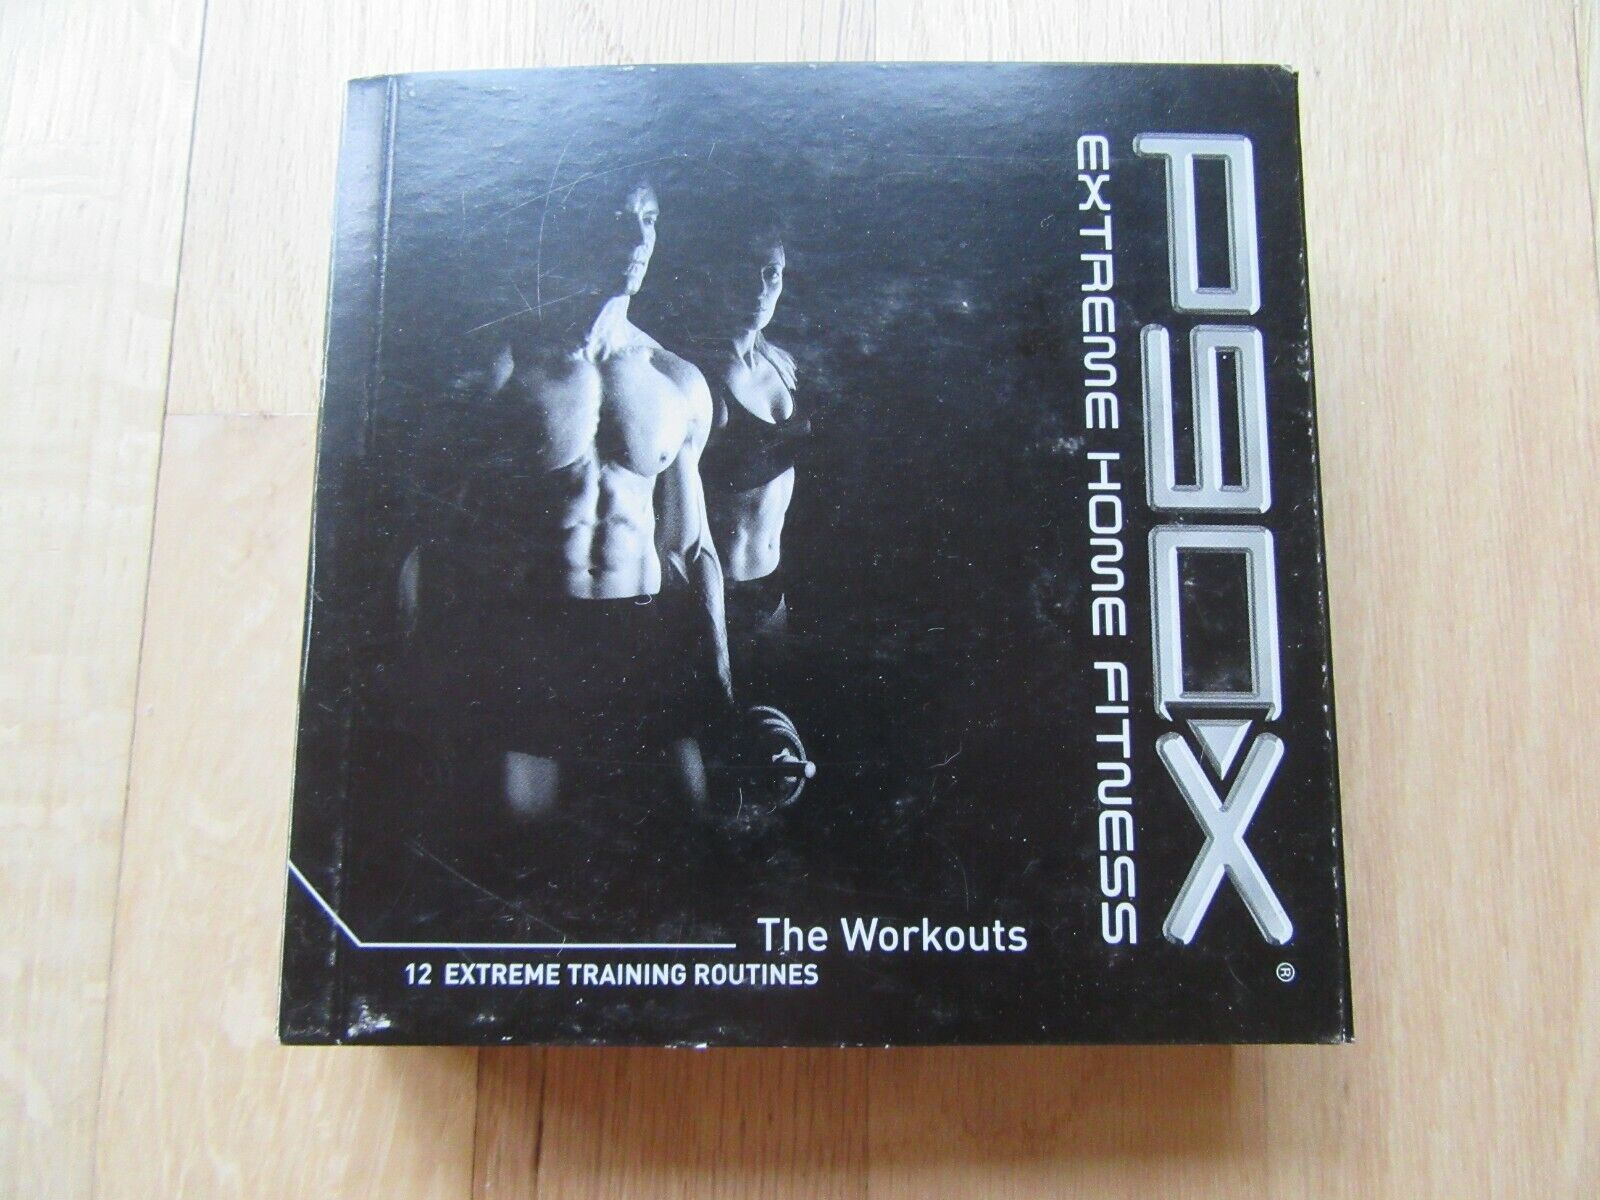 14S/P90X EXTREME HOME FITNESS/12 EXTREME TRAINING ROUTINES/DVD SET!